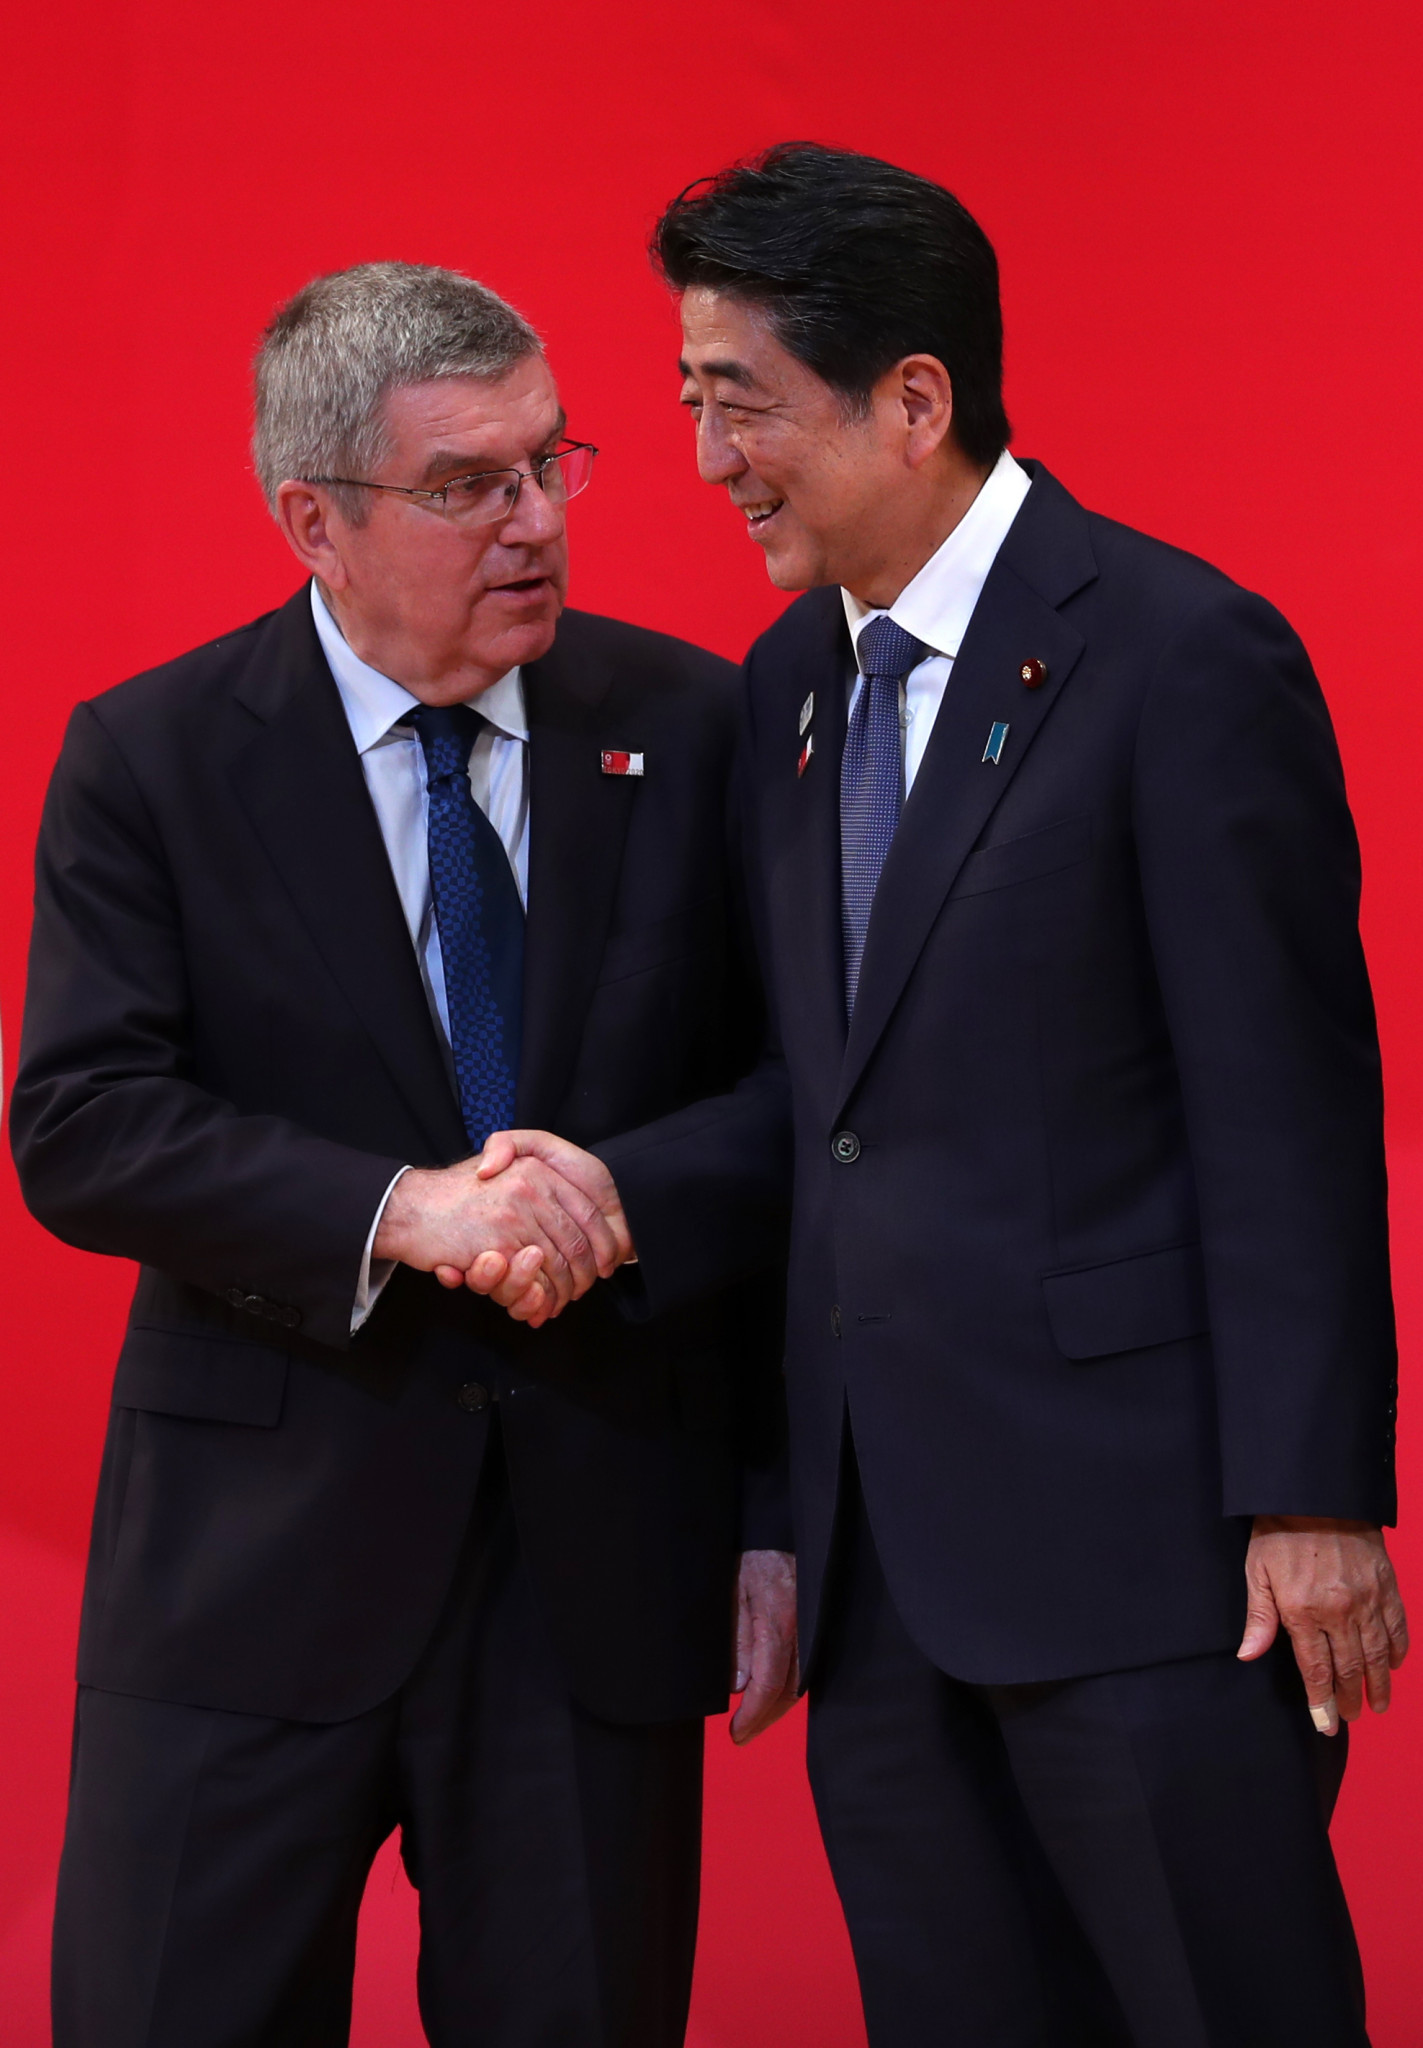 Thomas Bach, left, met with Japanese Prime Minister Shinzō Abe, right ©Getty Images